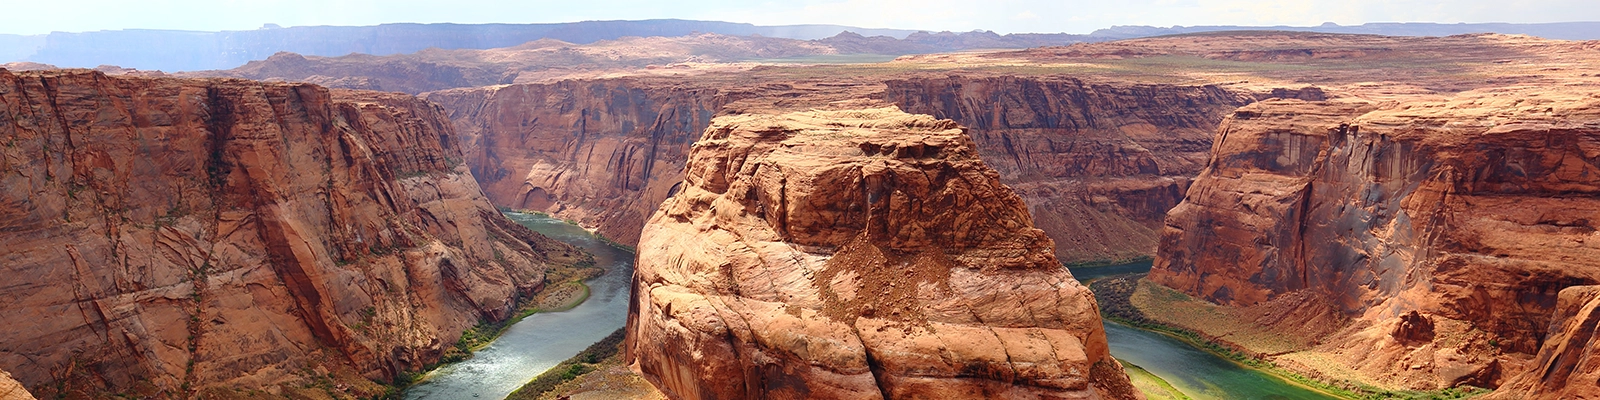 Scenic view of the majestic Grand Canyon National Park, with dramatic cliffs and colorful rock formations